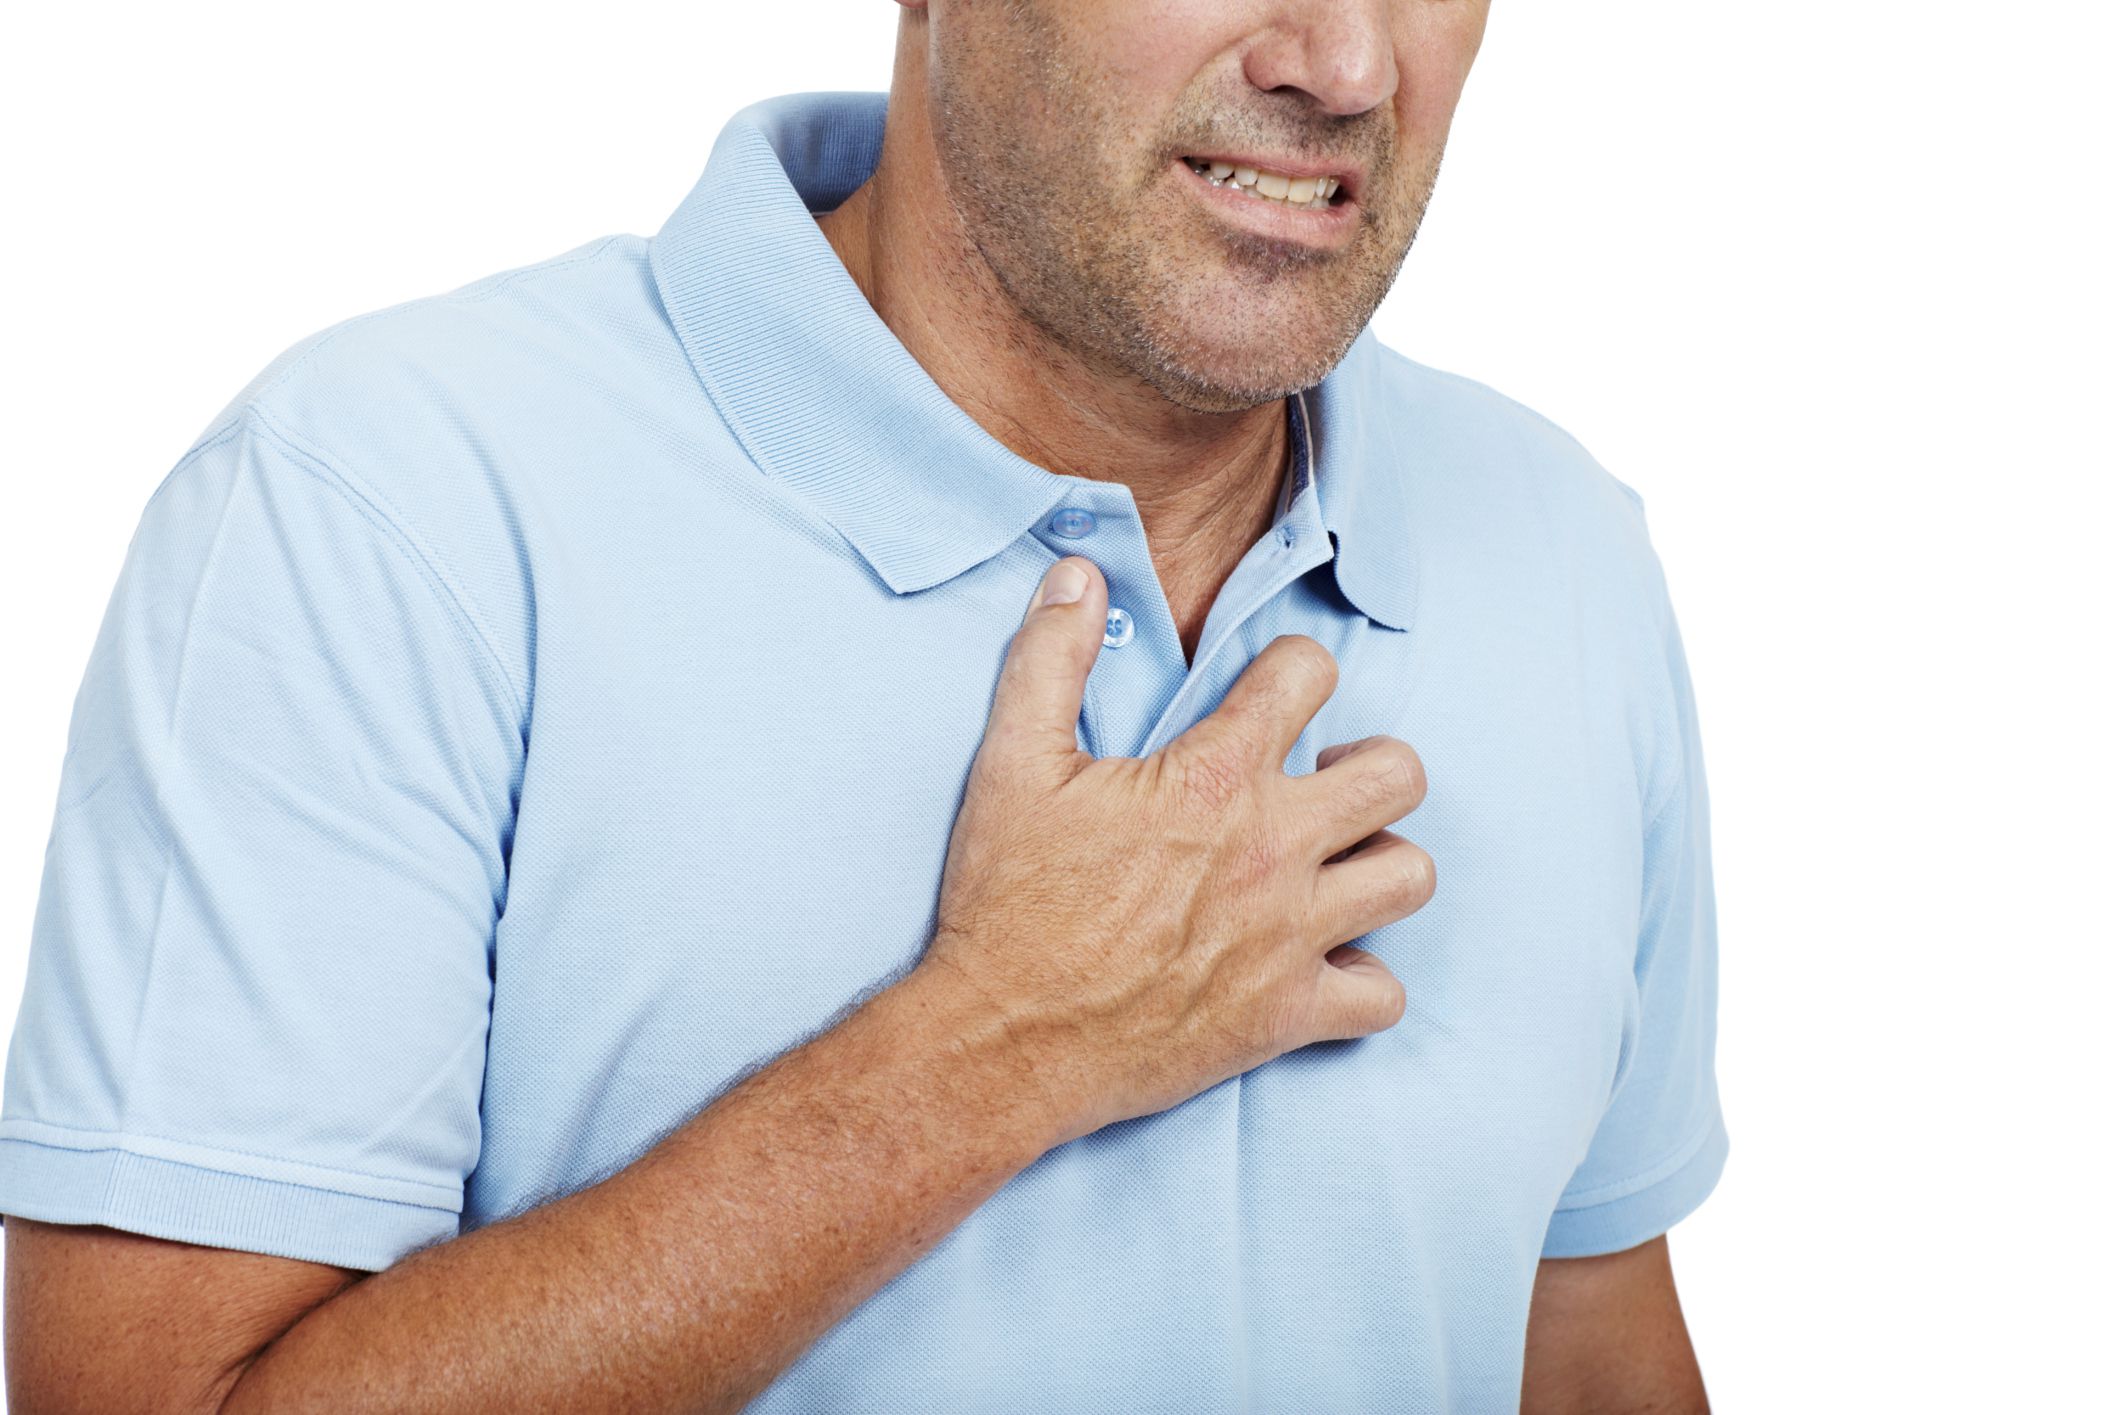 How to Get Rid of Heartburn with Viagra?